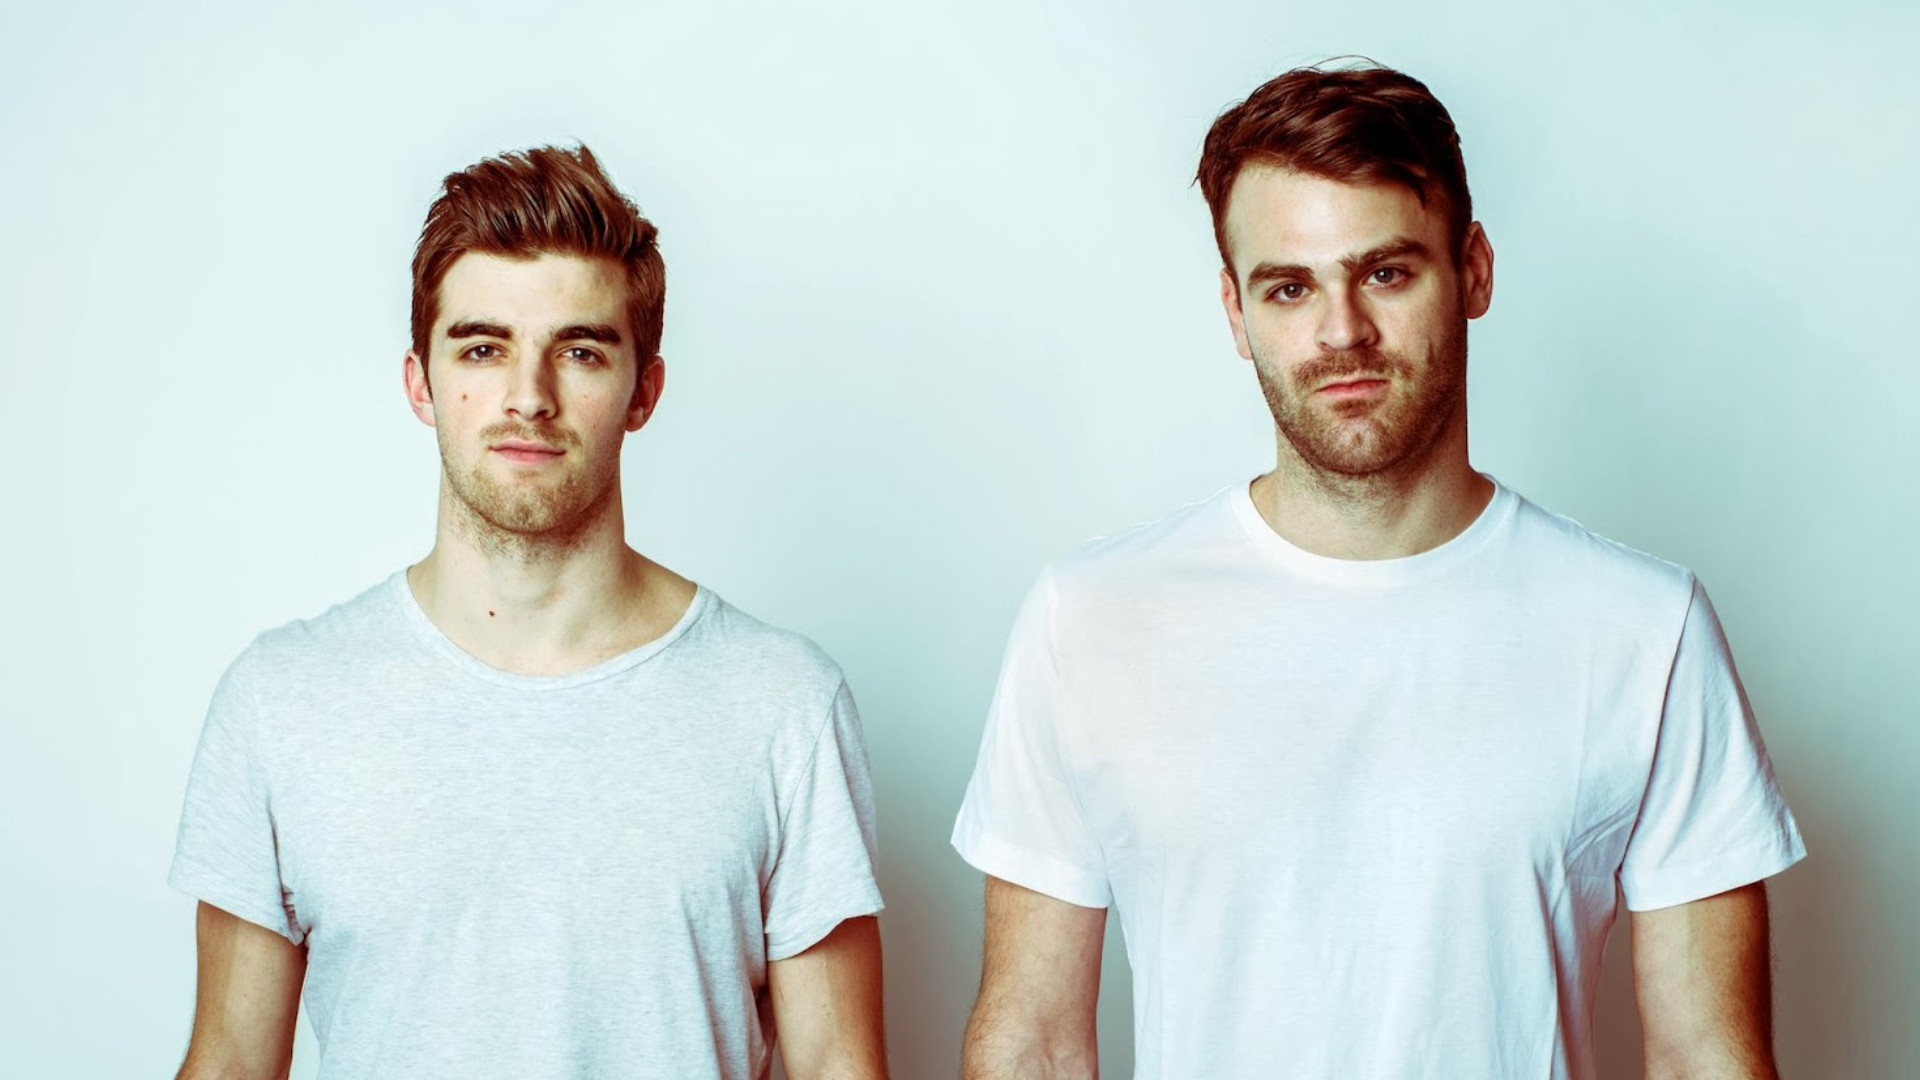 1920x1080 The Chainsmokers Desktop Wallpaper Pictures 62741